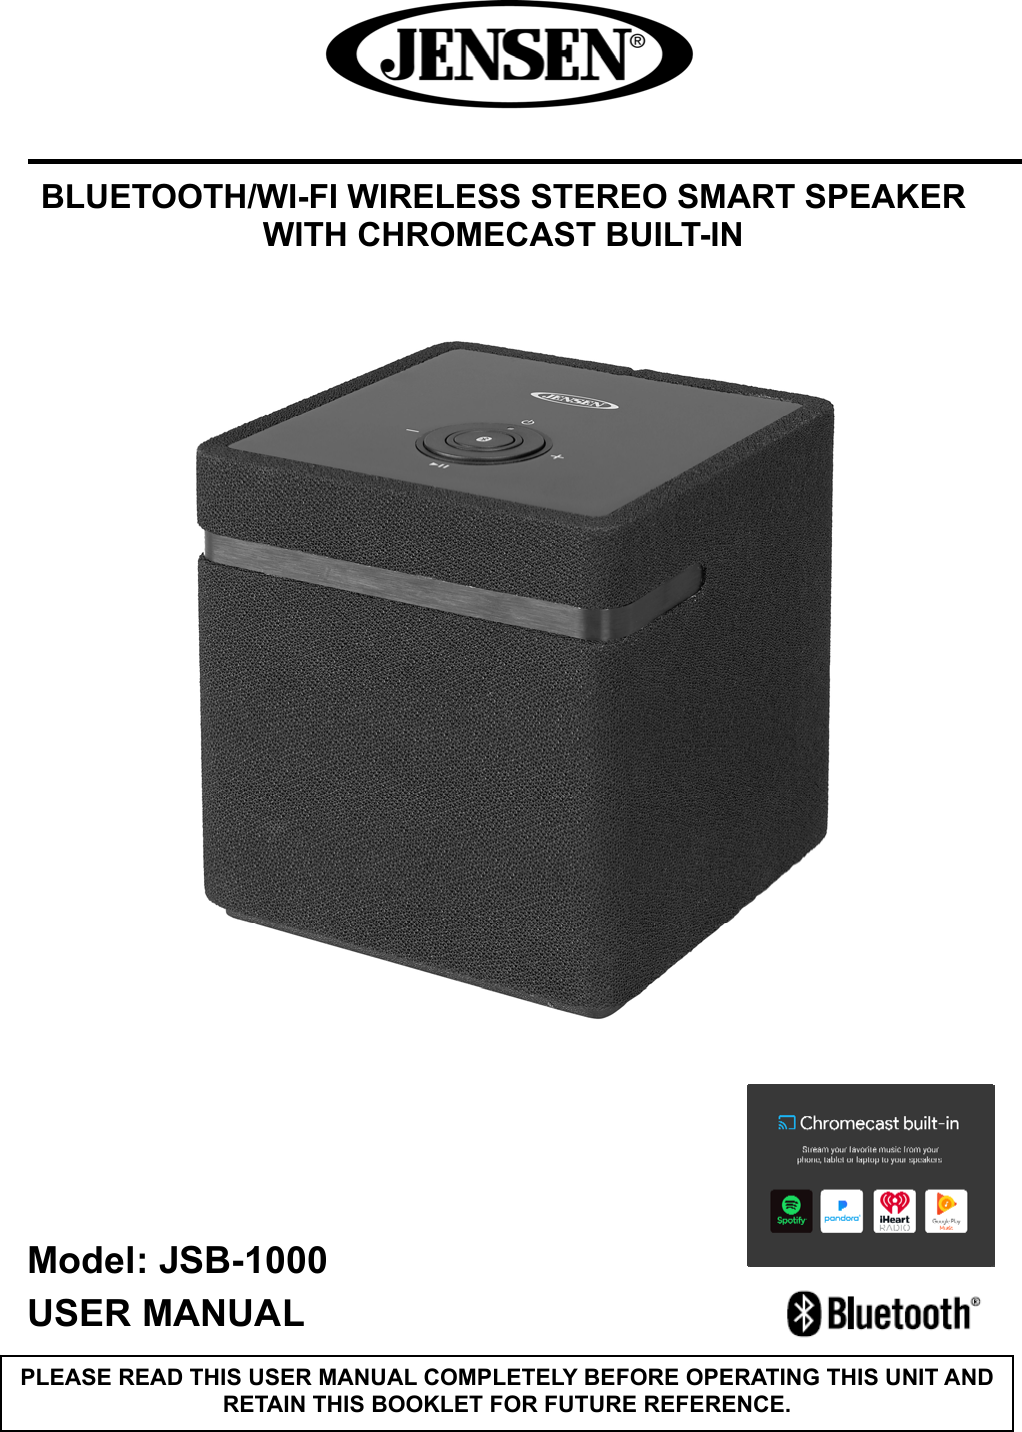       BLUETOOTH/WI-FI WIRELESS STEREO SMART SPEAKER WITH CHROMECAST BUILT-IN         Model: JSB-1000    USER MANUAL                           PLEASE READ THIS USER MANUAL COMPLETELY BEFORE OPERATING THIS UNIT AND RETAIN THIS BOOKLET FOR FUTURE REFERENCE. 